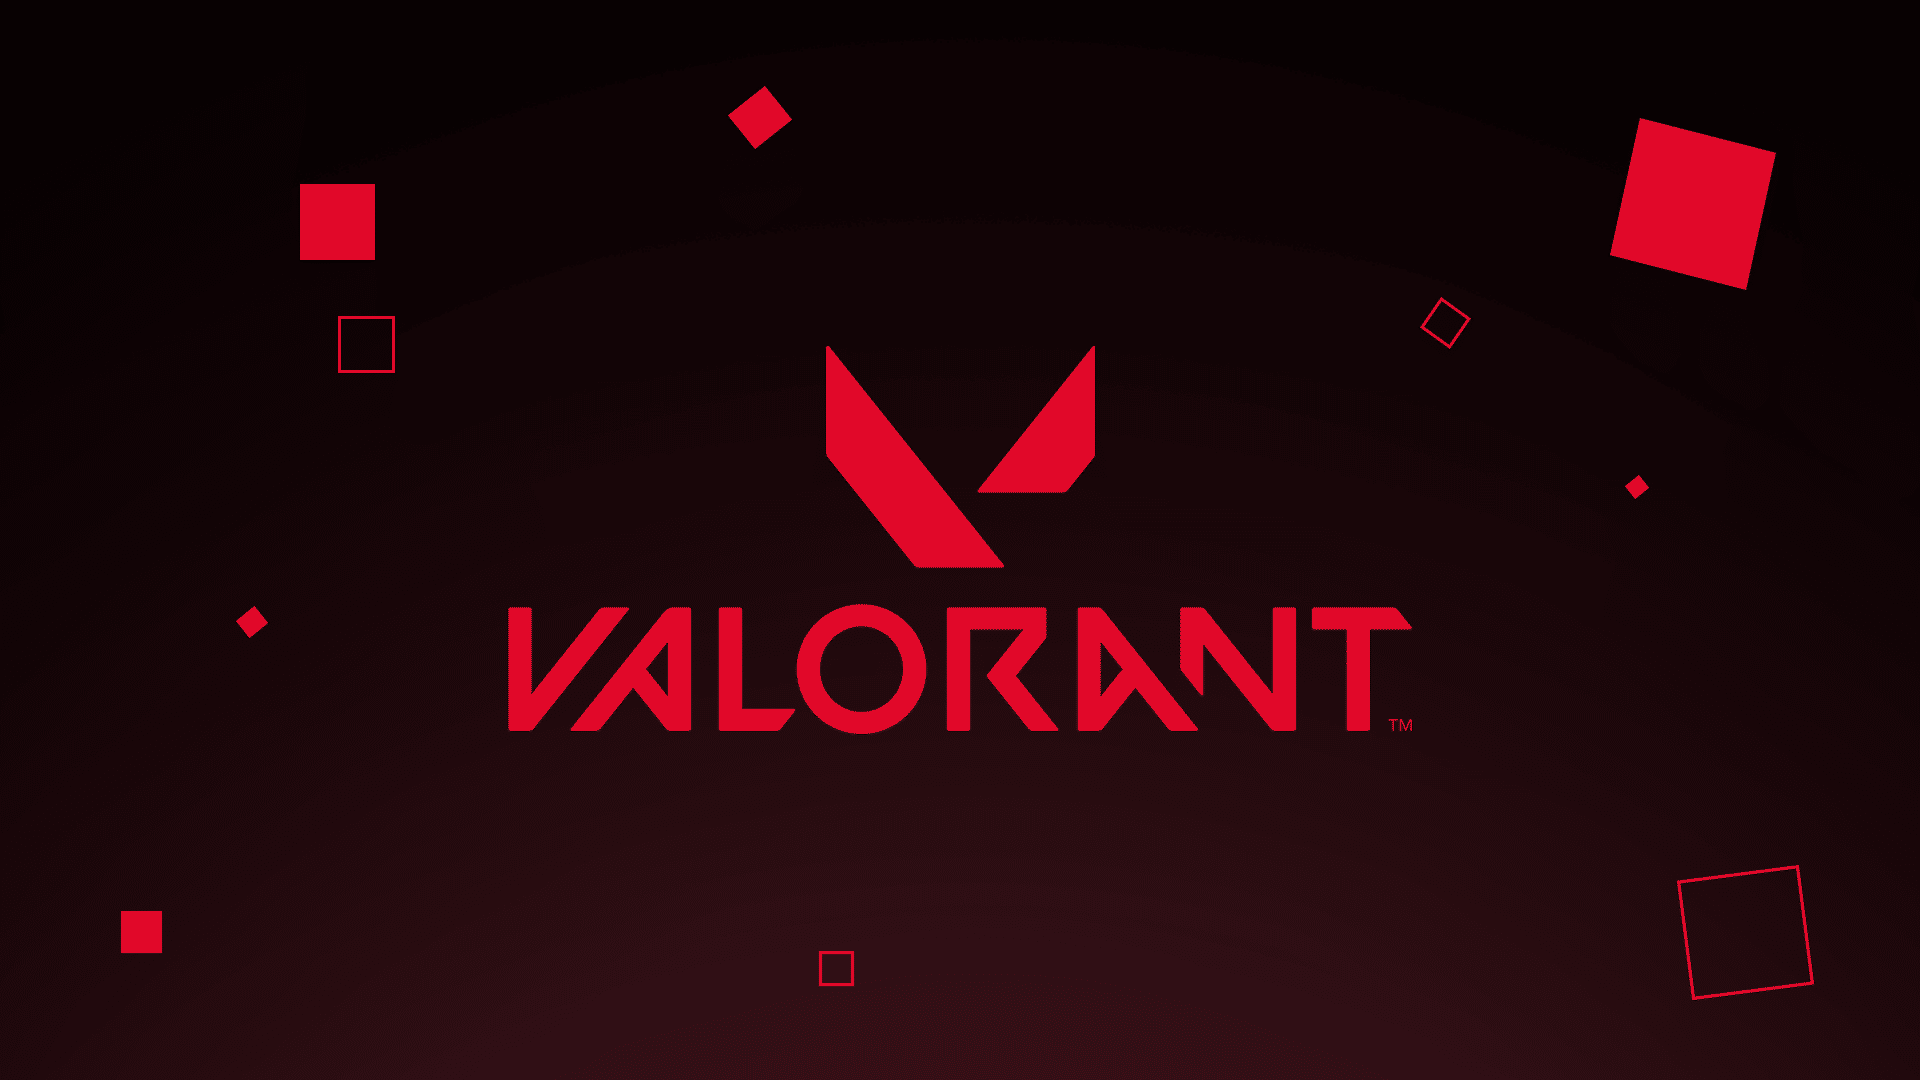 Image by Naceja – The Valorant logo over a red-black background with floating cubes.